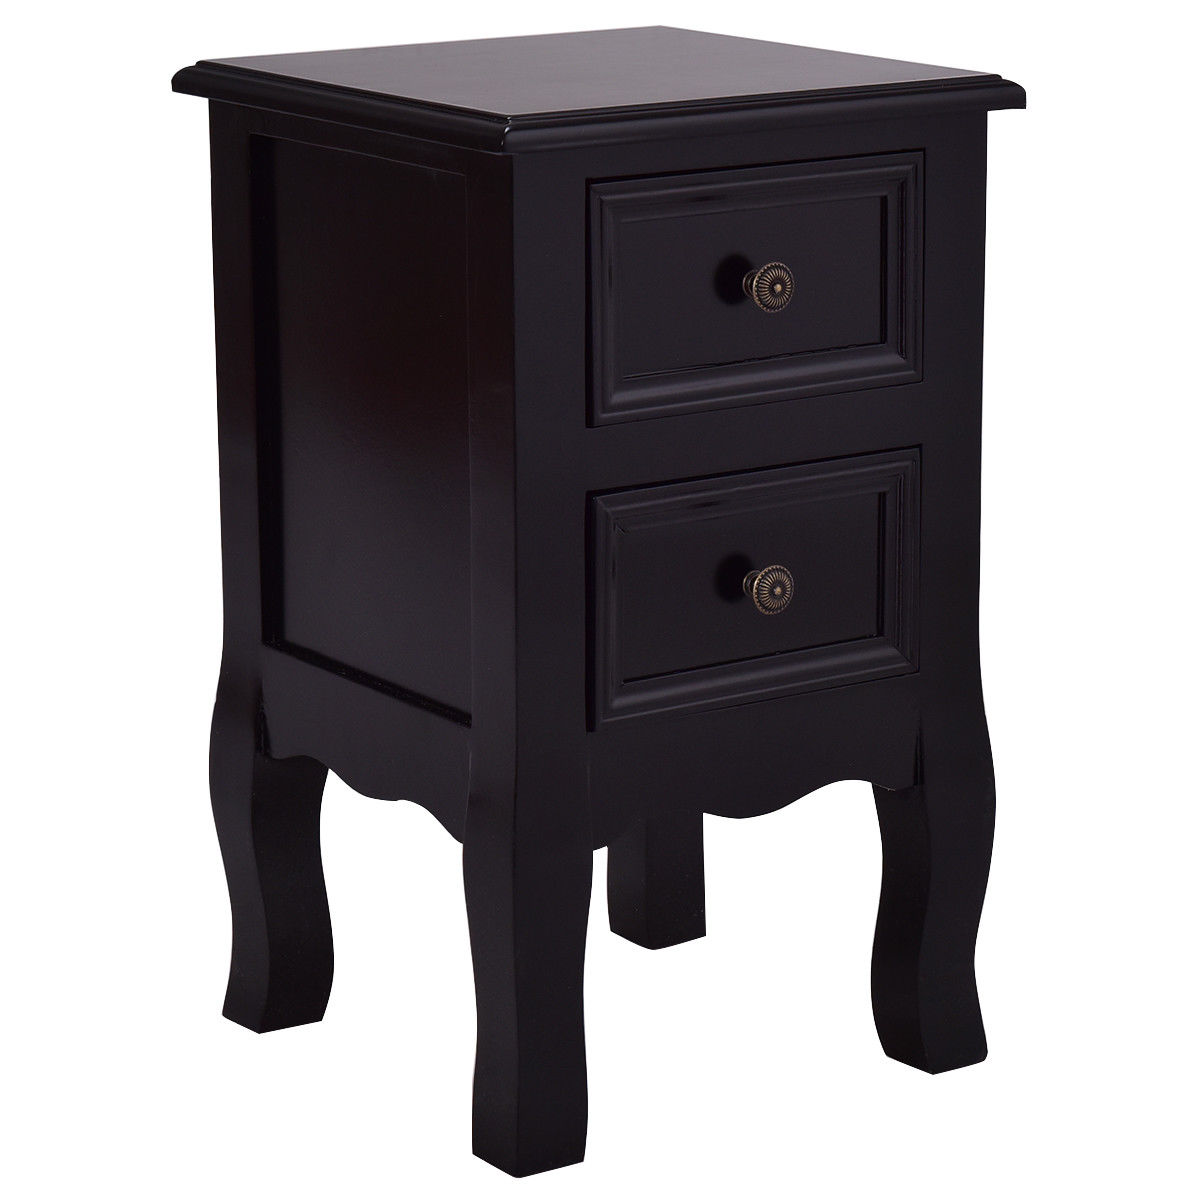 way black night stand storage drawers wood end accent table with ikea closet organizer side tabletop gas grill tama drum stool large white umbrella farmhouse dining plans mid